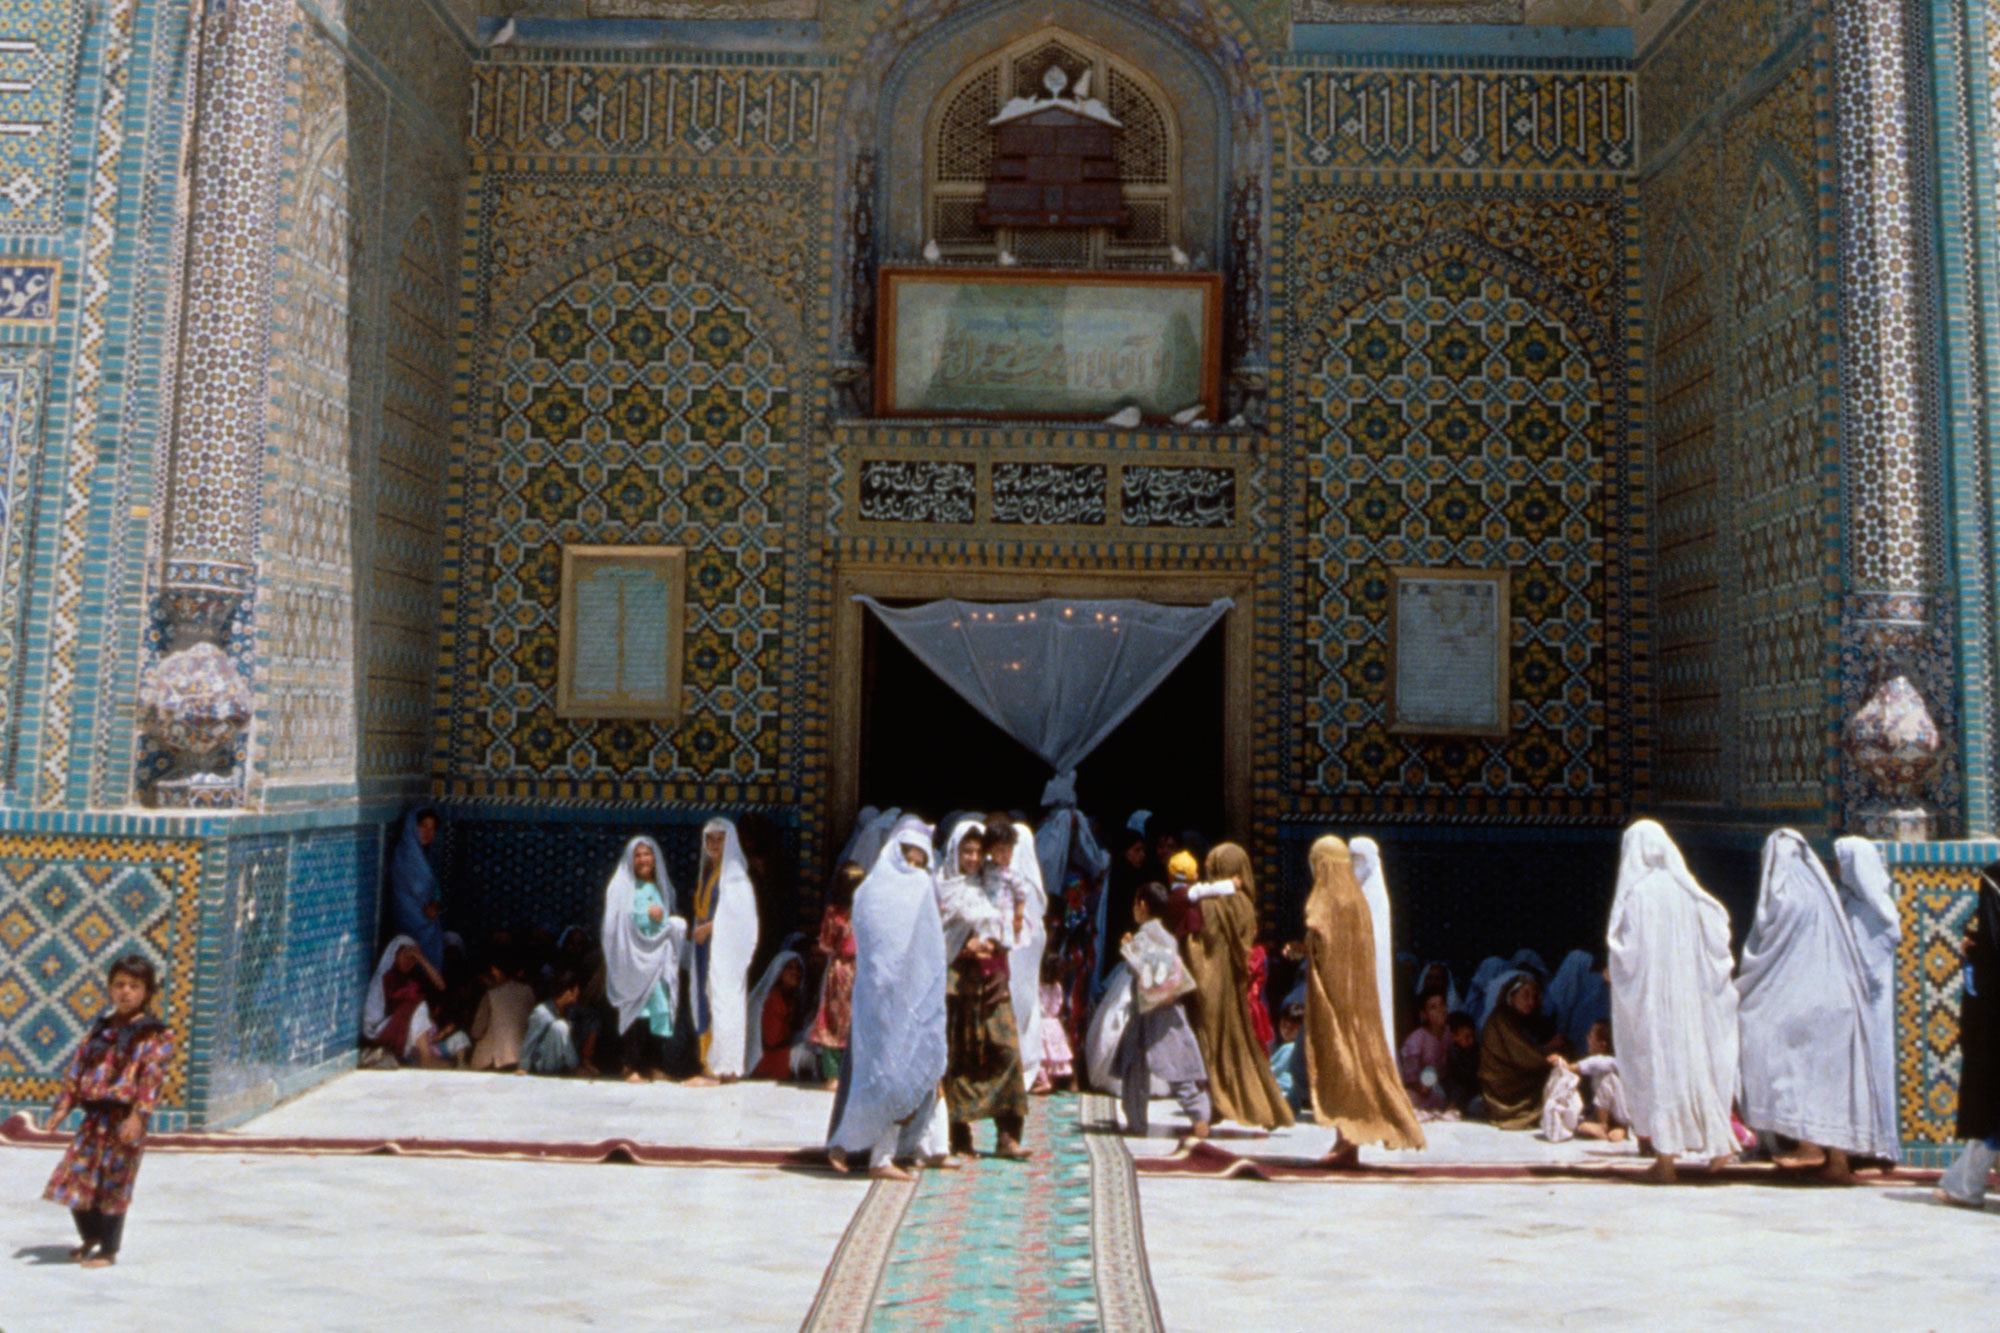 Women gather in the shade of the high archway entrance to a mosque in the northern city of Mazar-i-Sharif, Afghanistan.